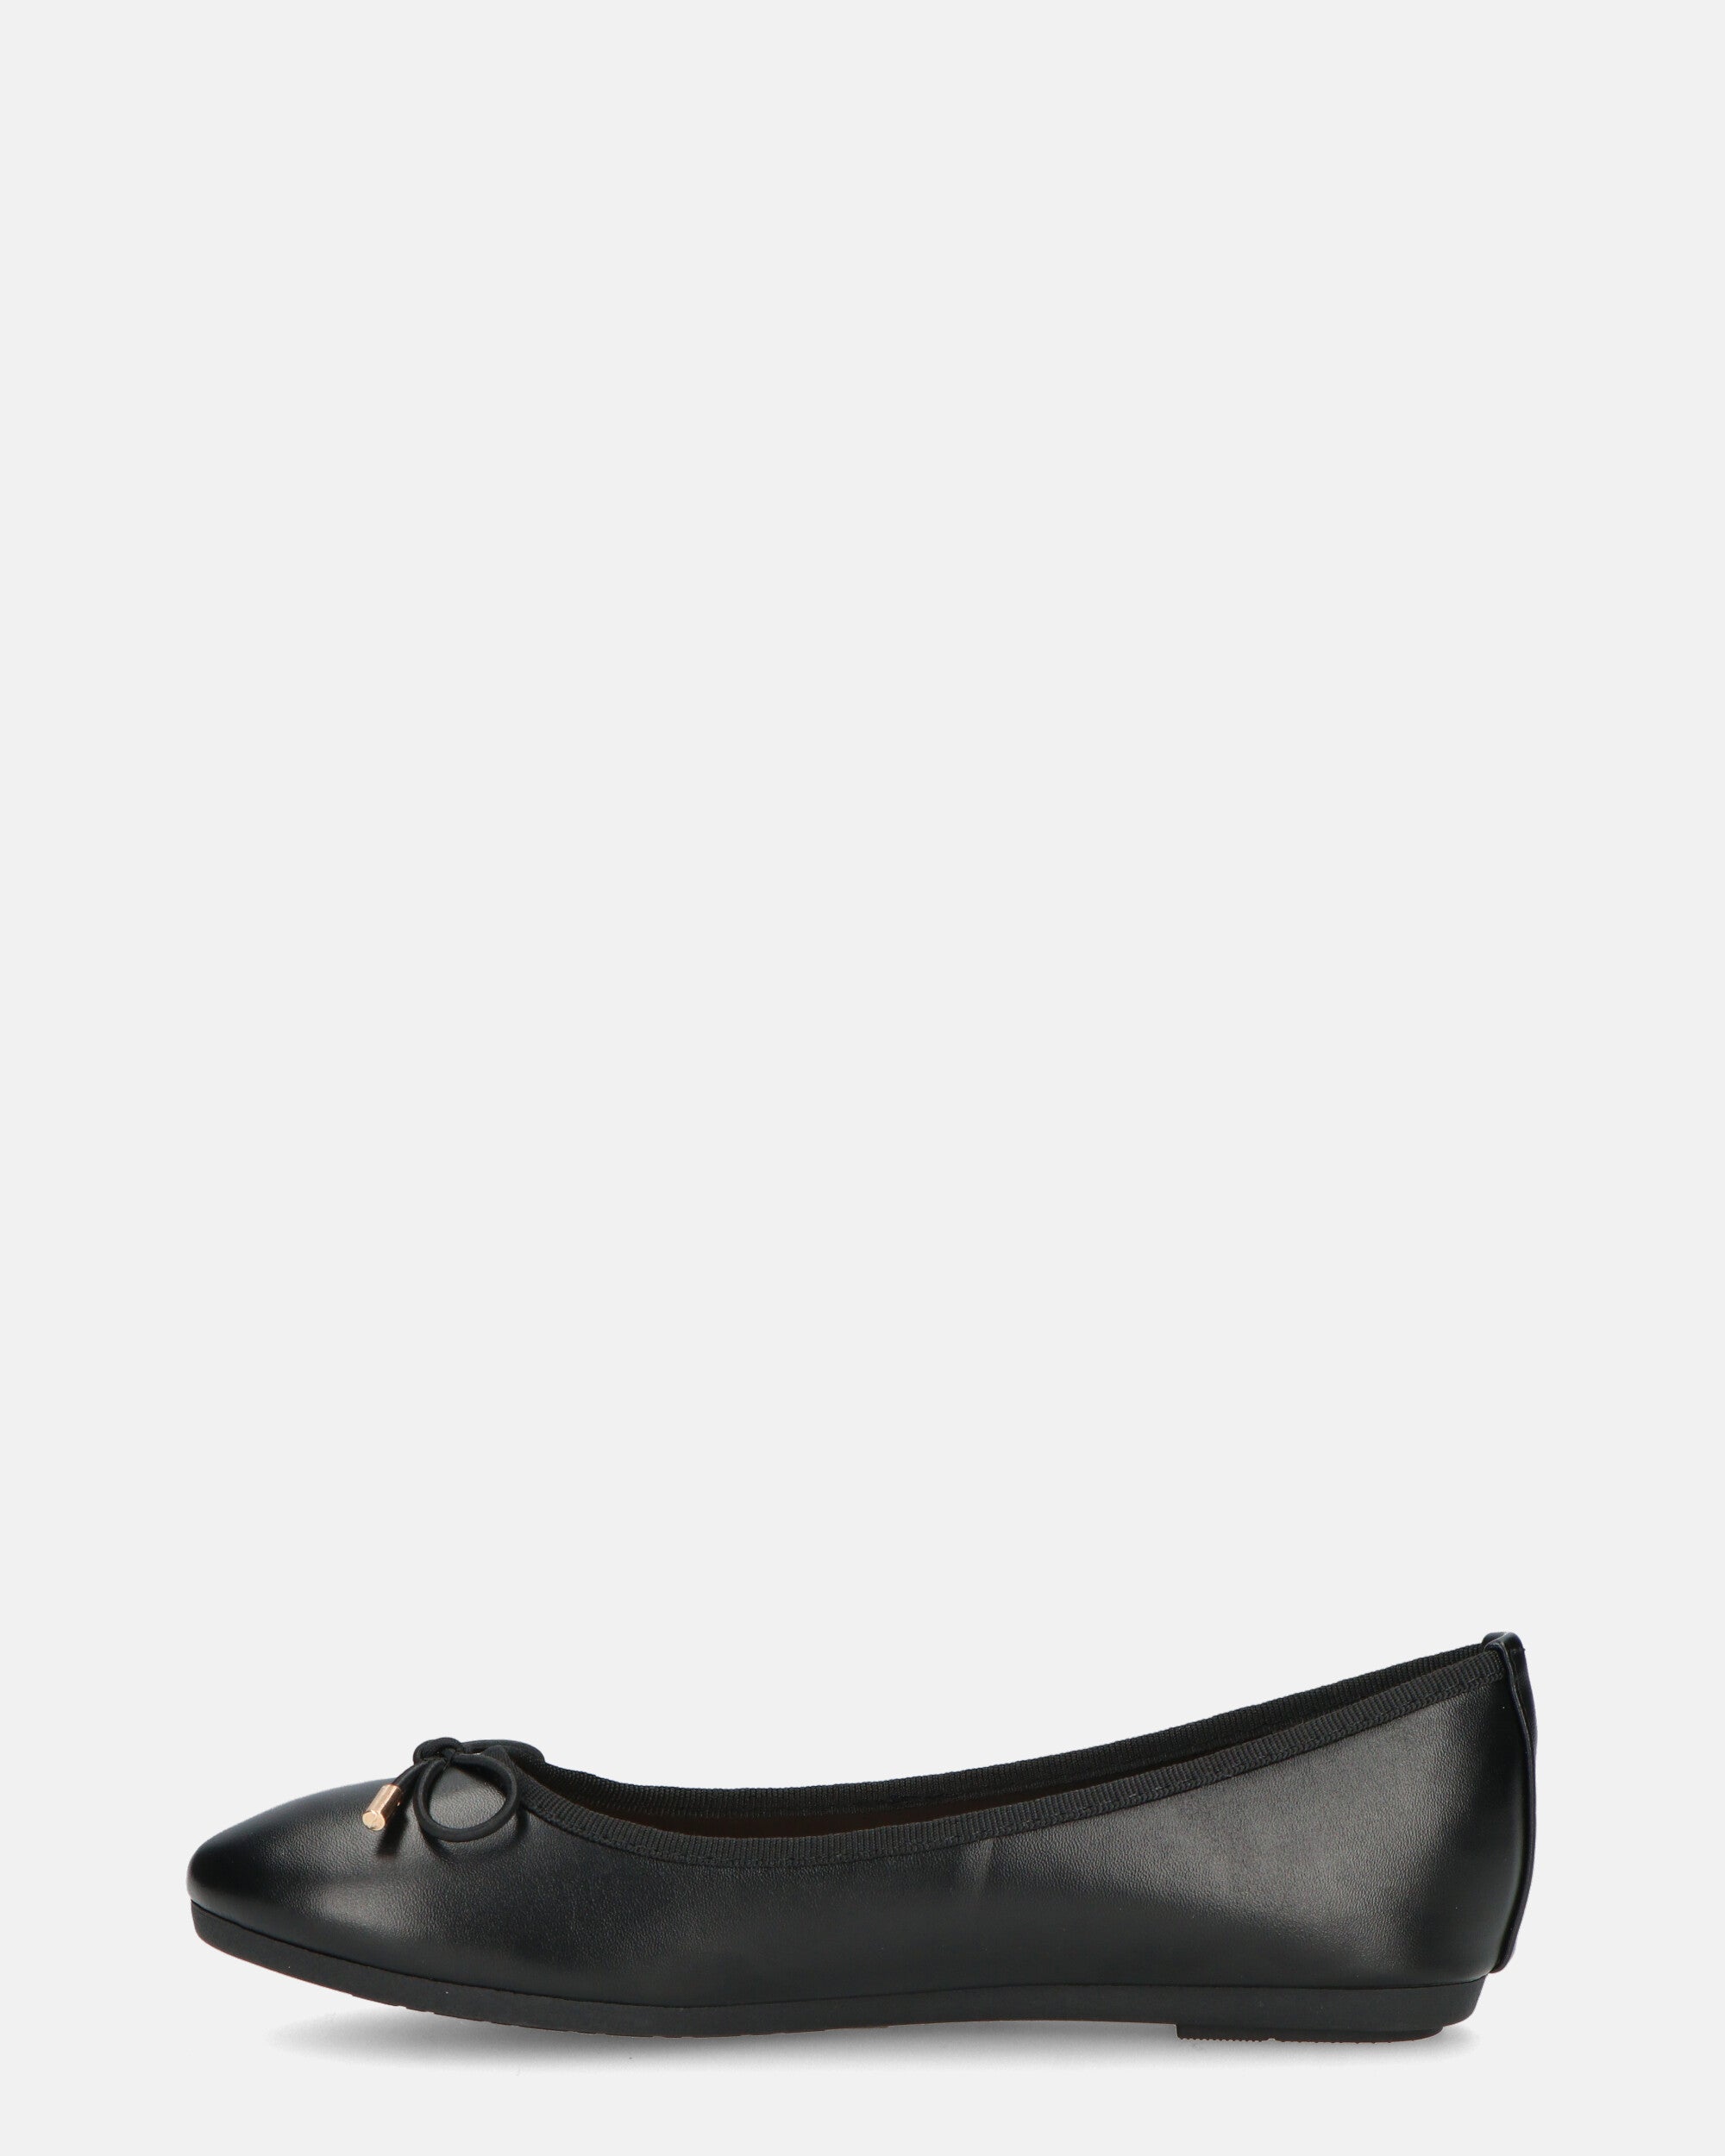 GWEN - black ballet flats with bow on toe